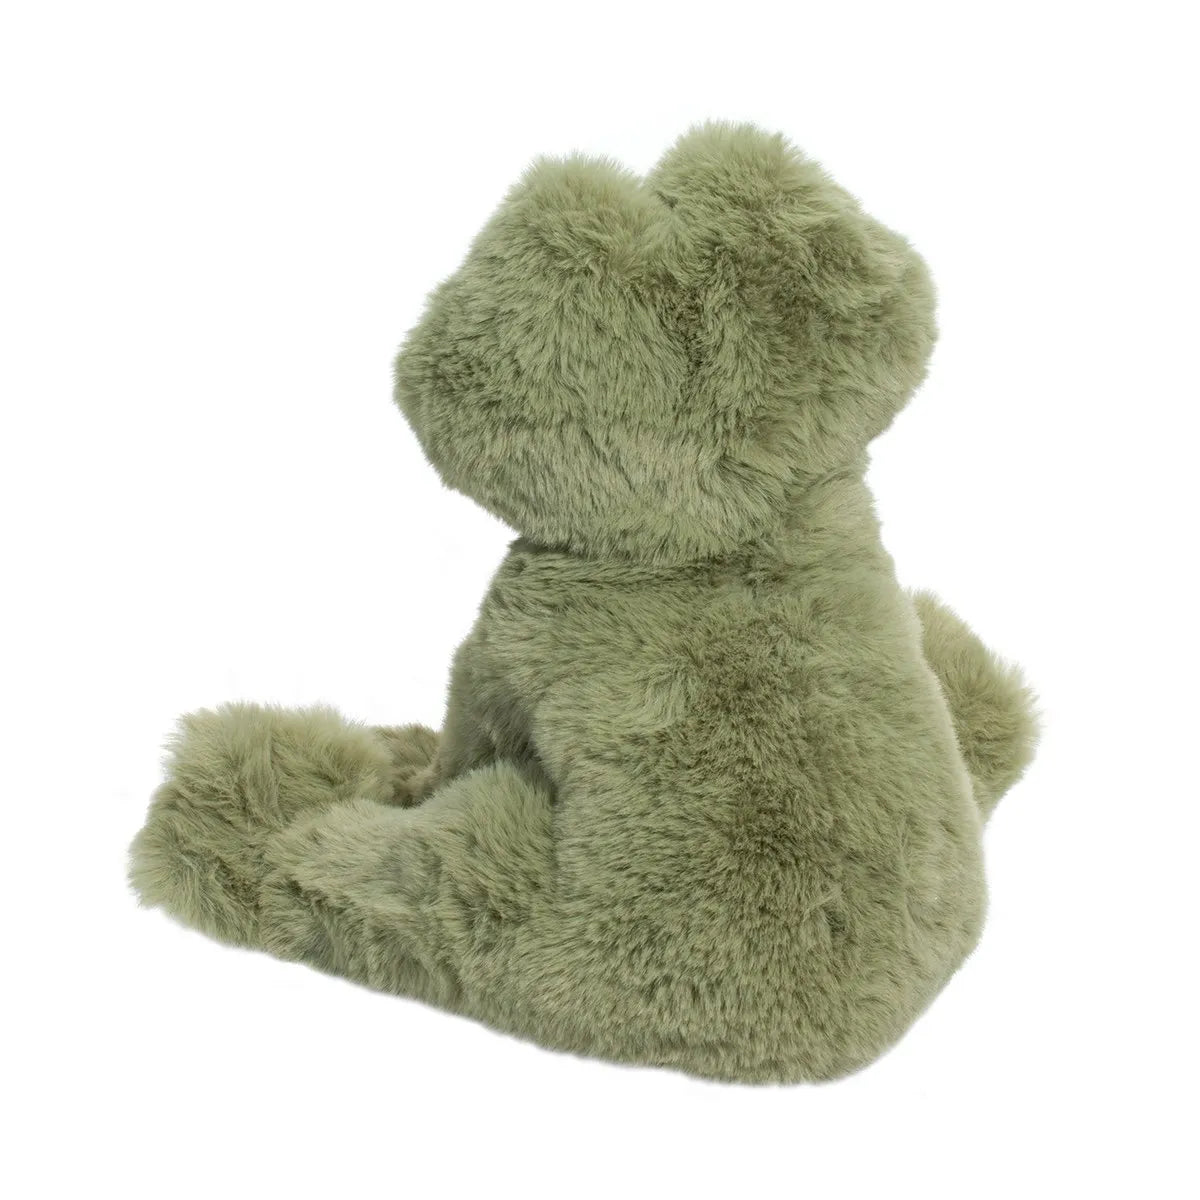 A Finnie Soft Frog plush toy sitting on a white background.